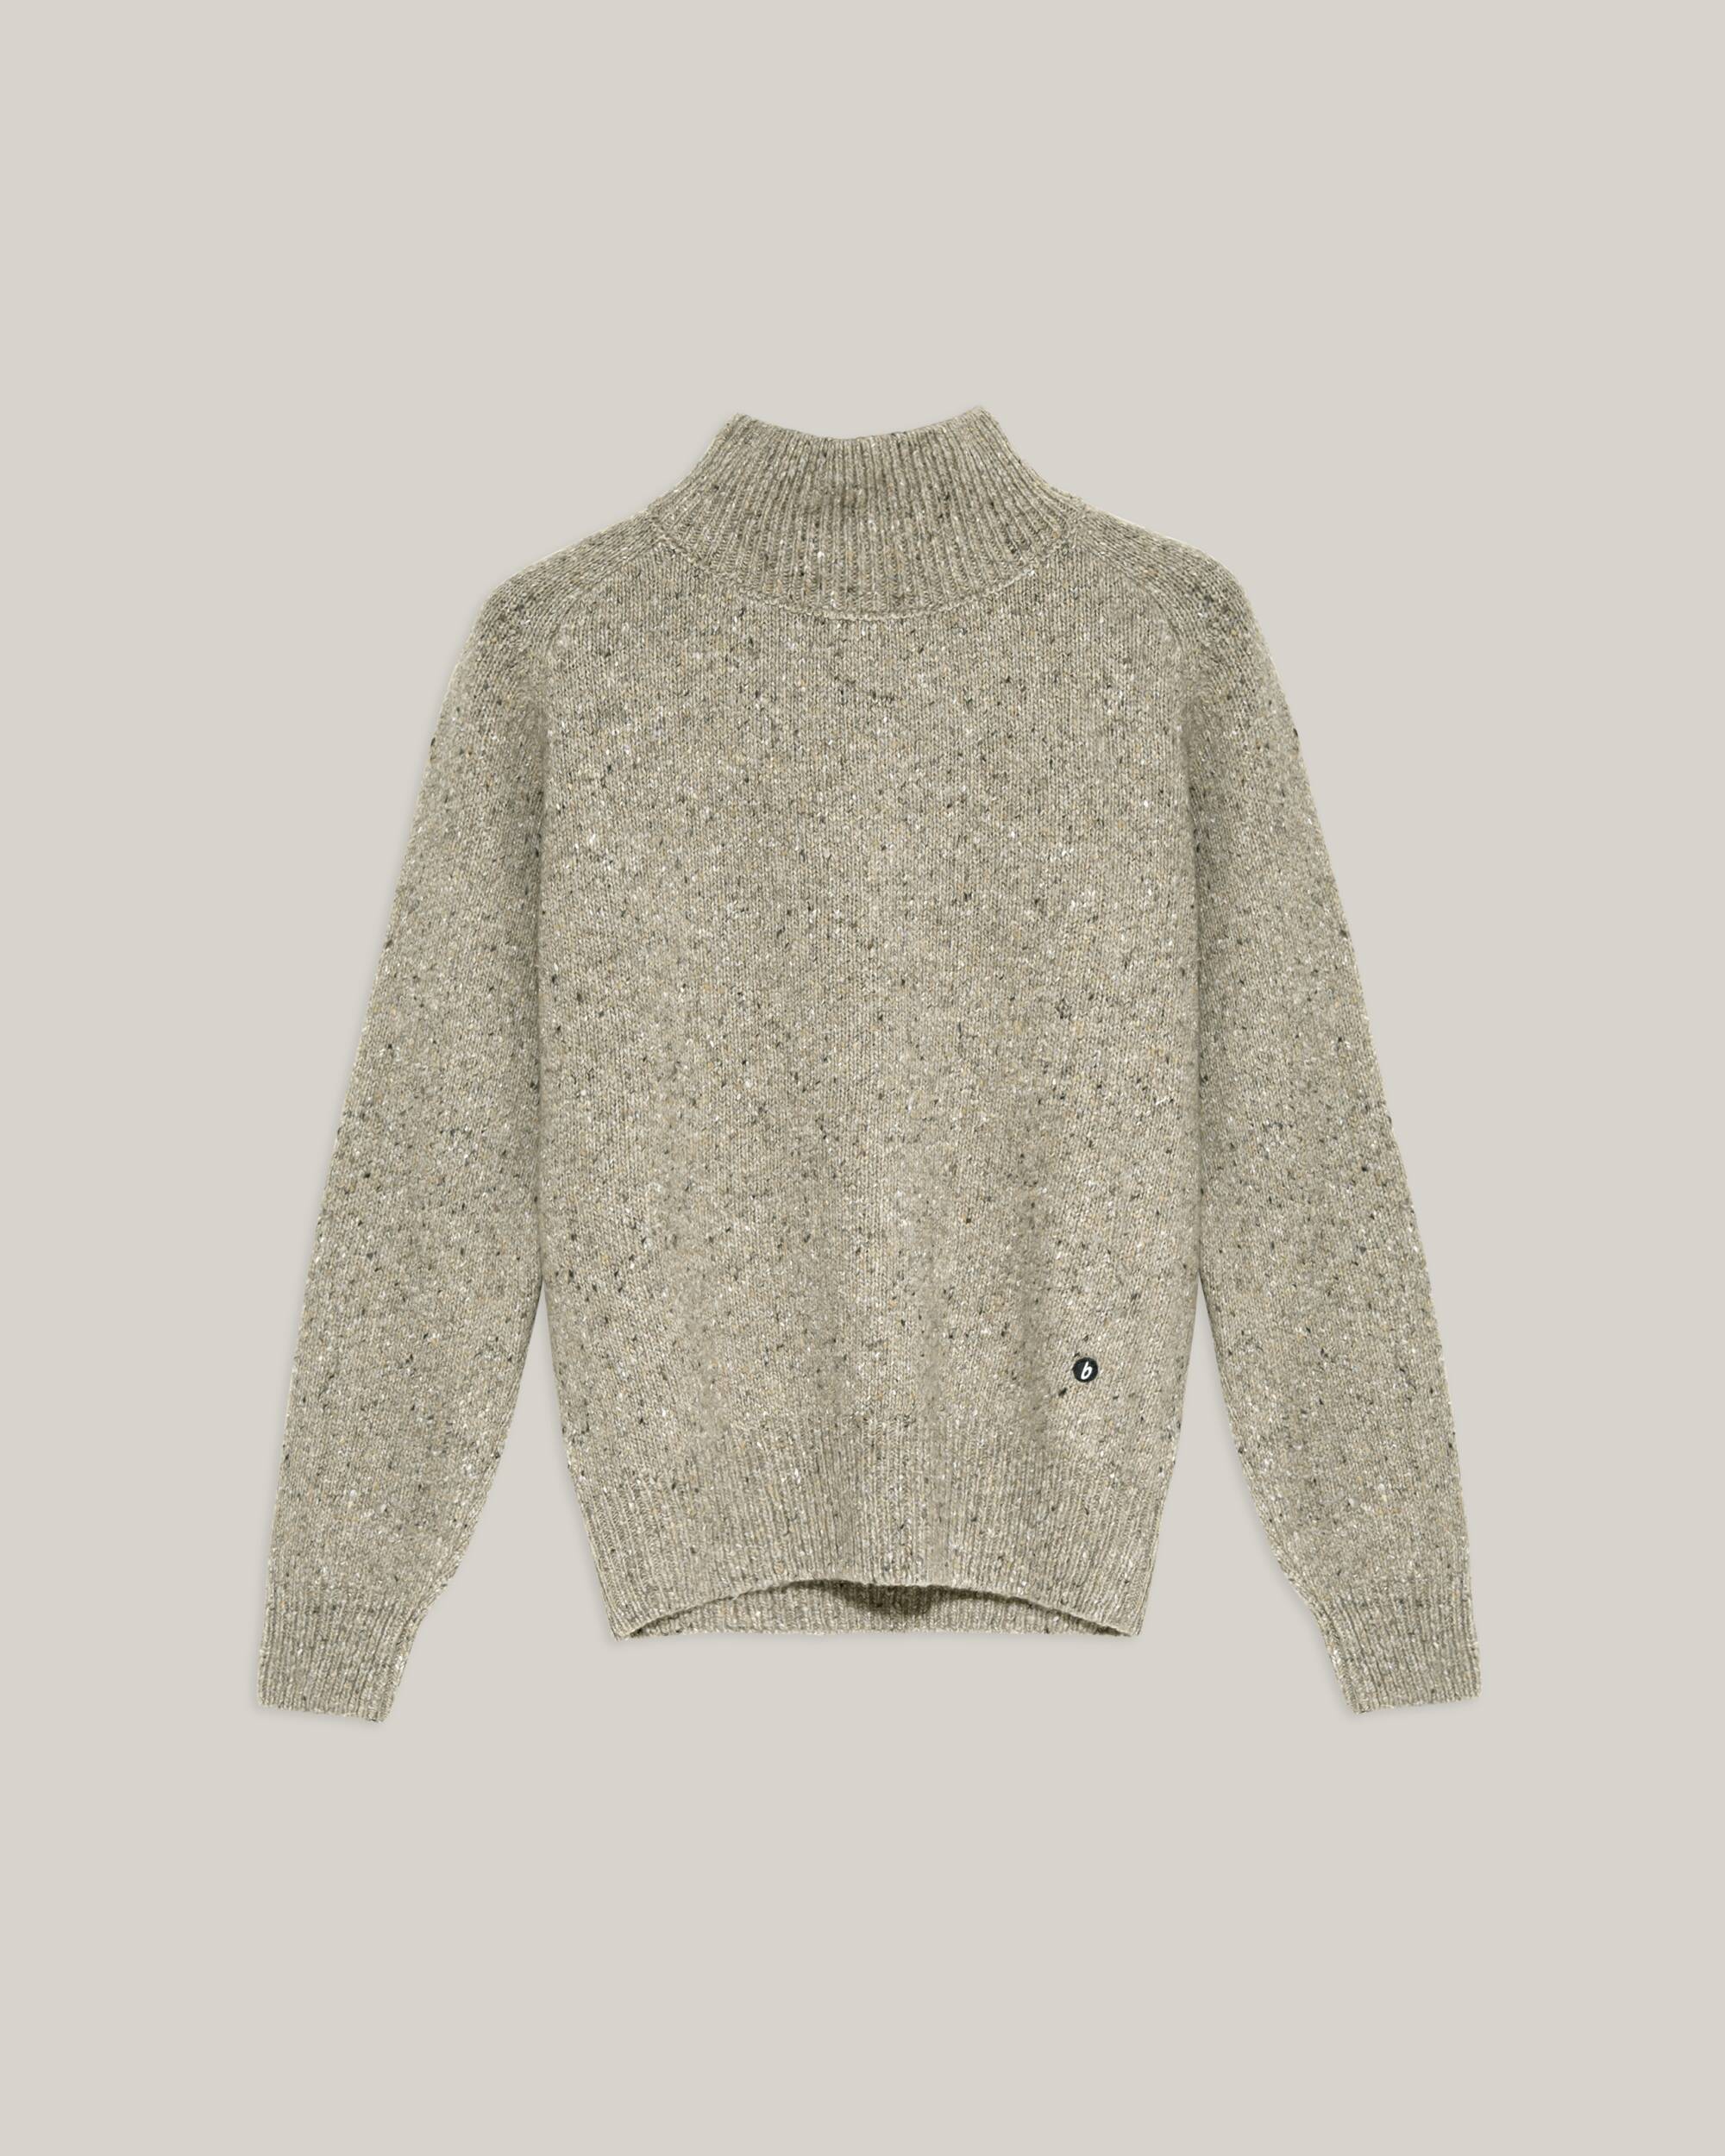 Turtleneck sweater "Perkins Neck" in off-white / beige made from recycled materials from Brava Fabrics